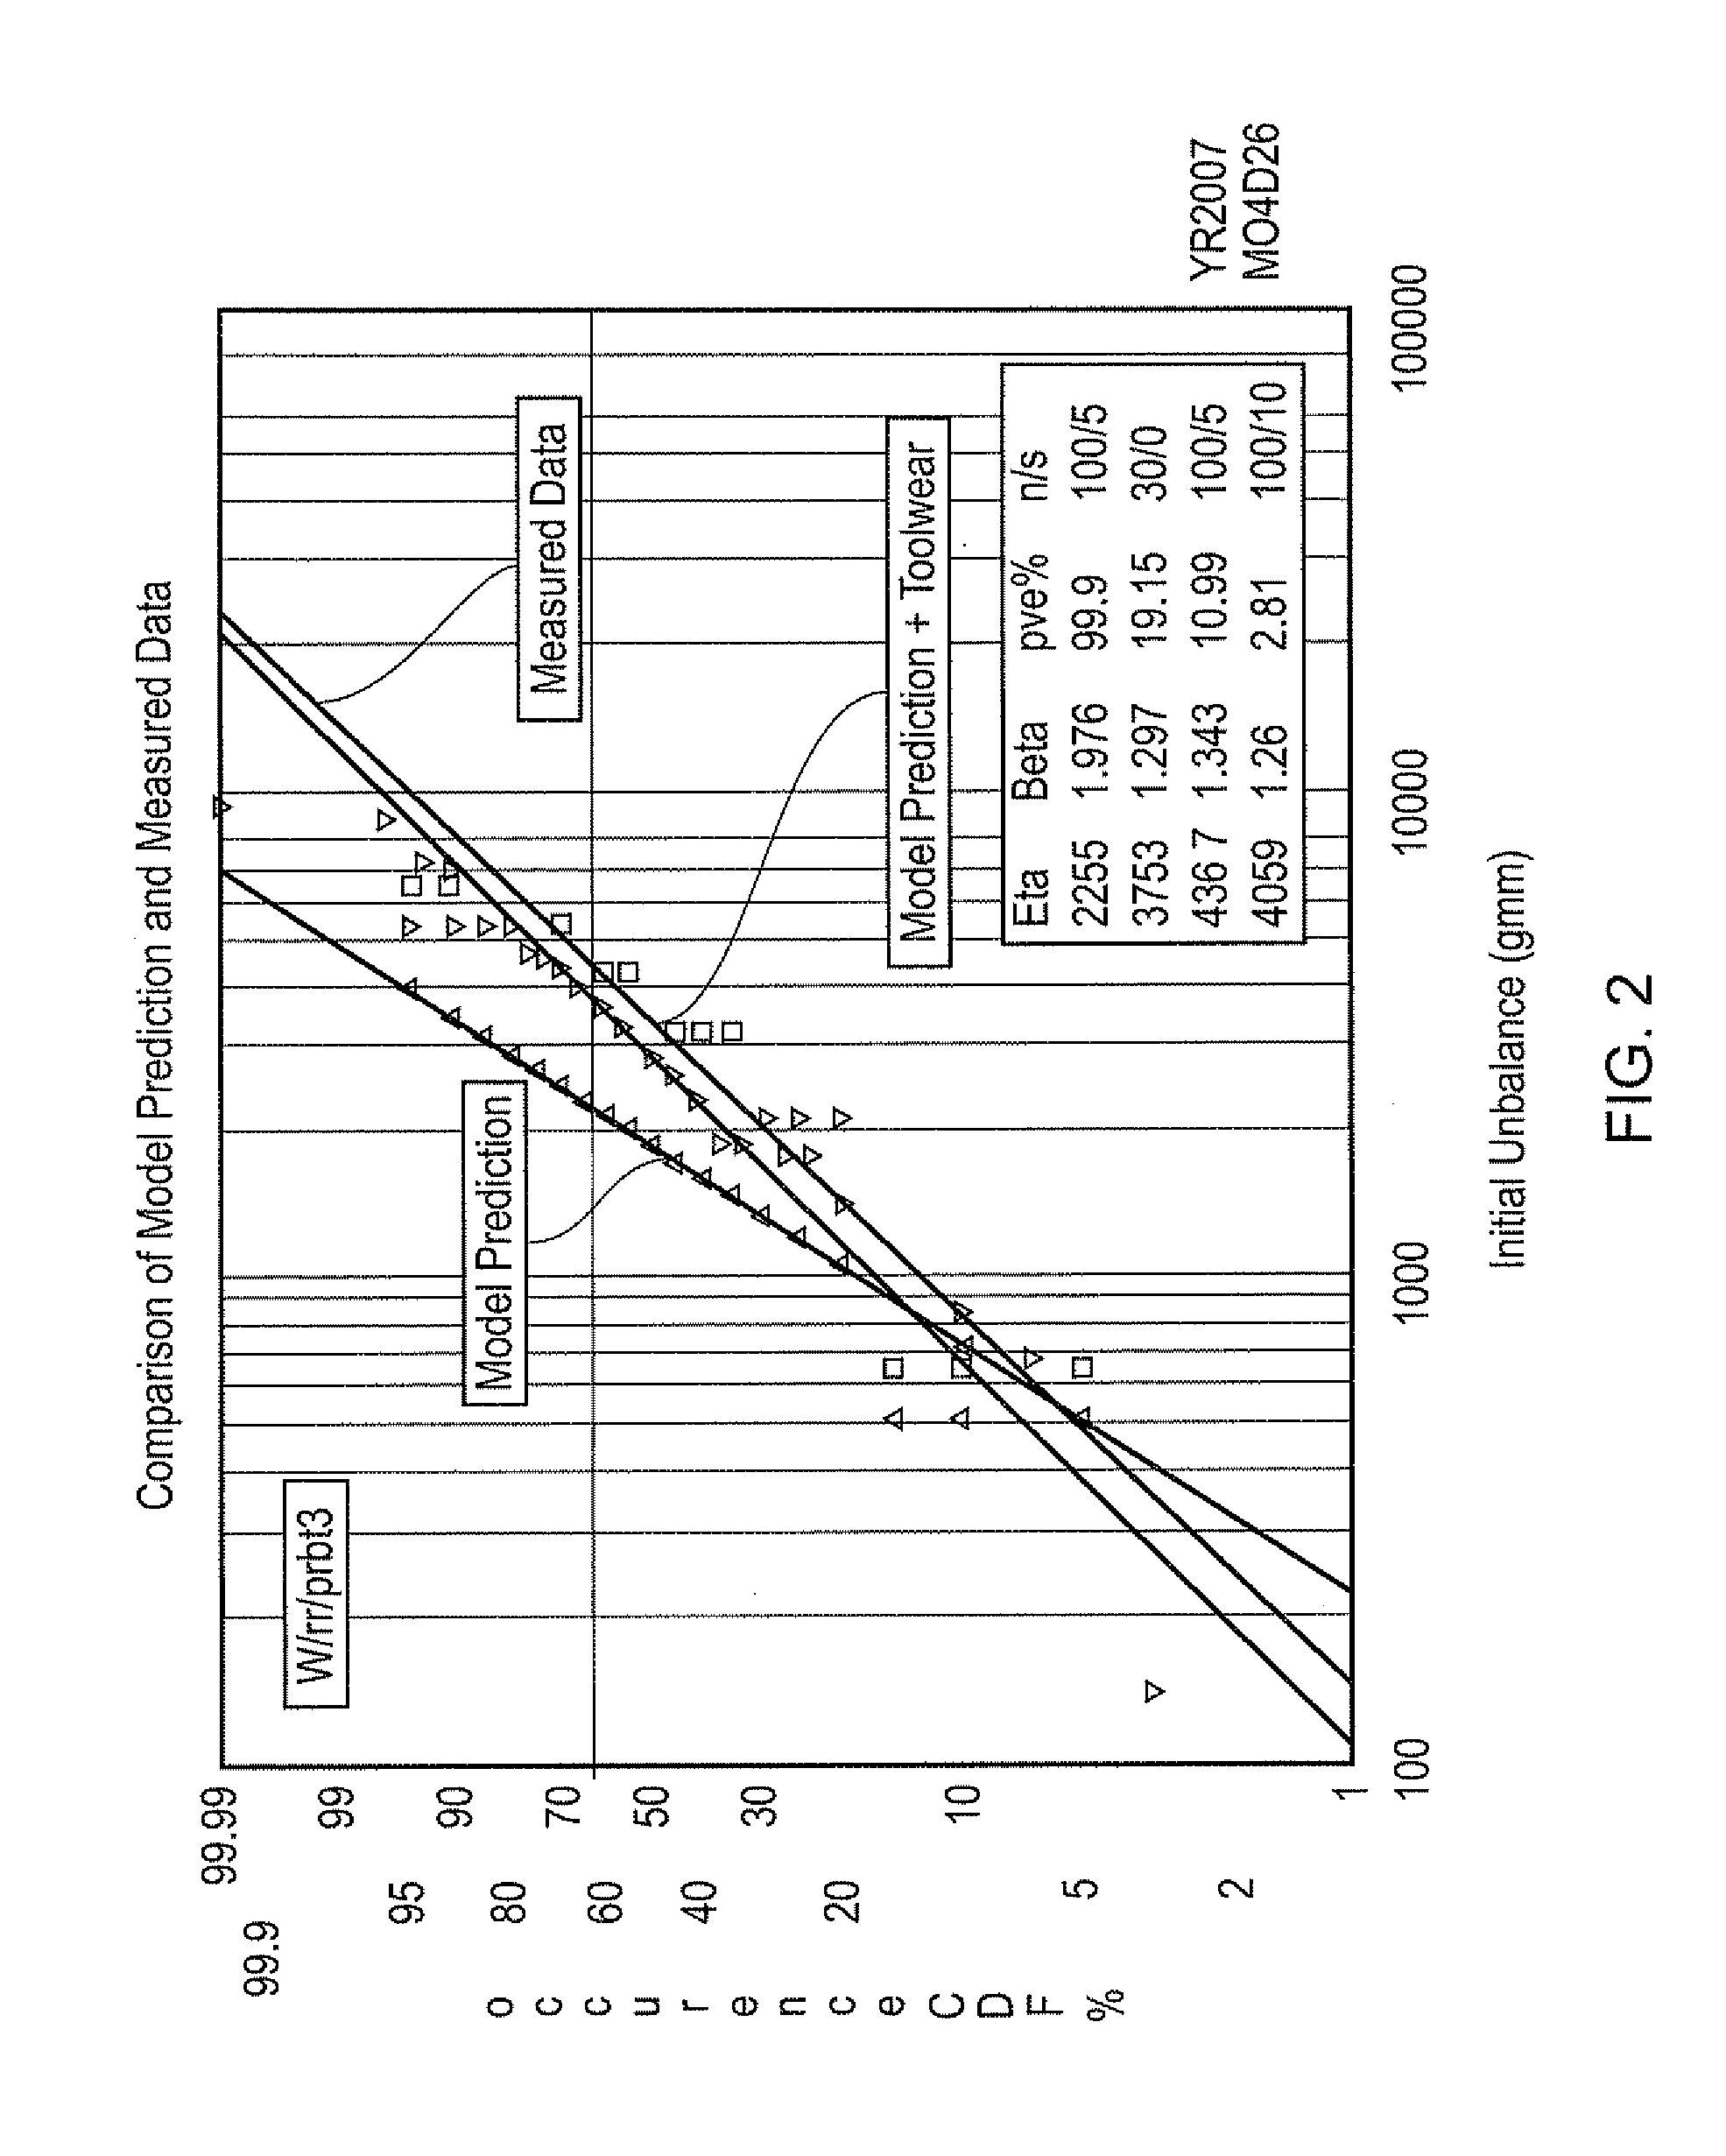 Method for predicting initial unbalance in a component